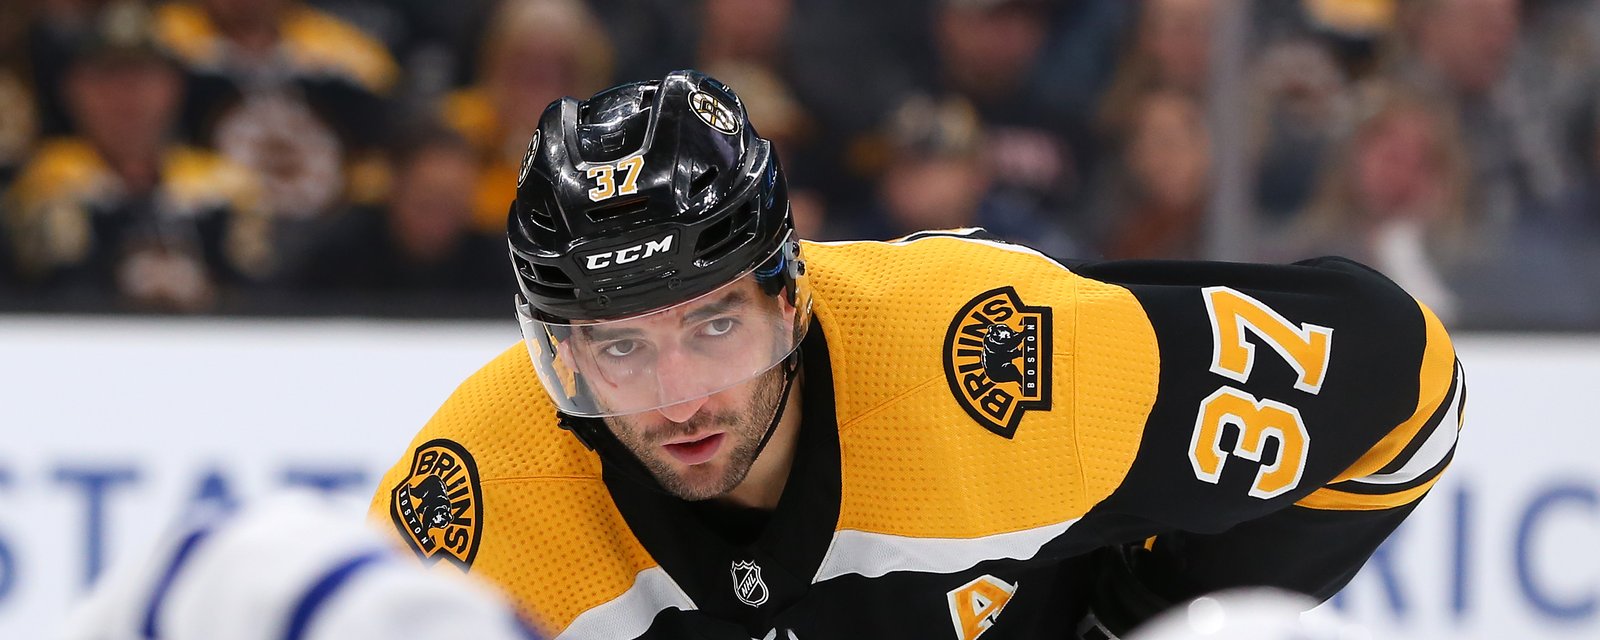 Bergeron' injury woes continue ahead of matinee against the Rangers